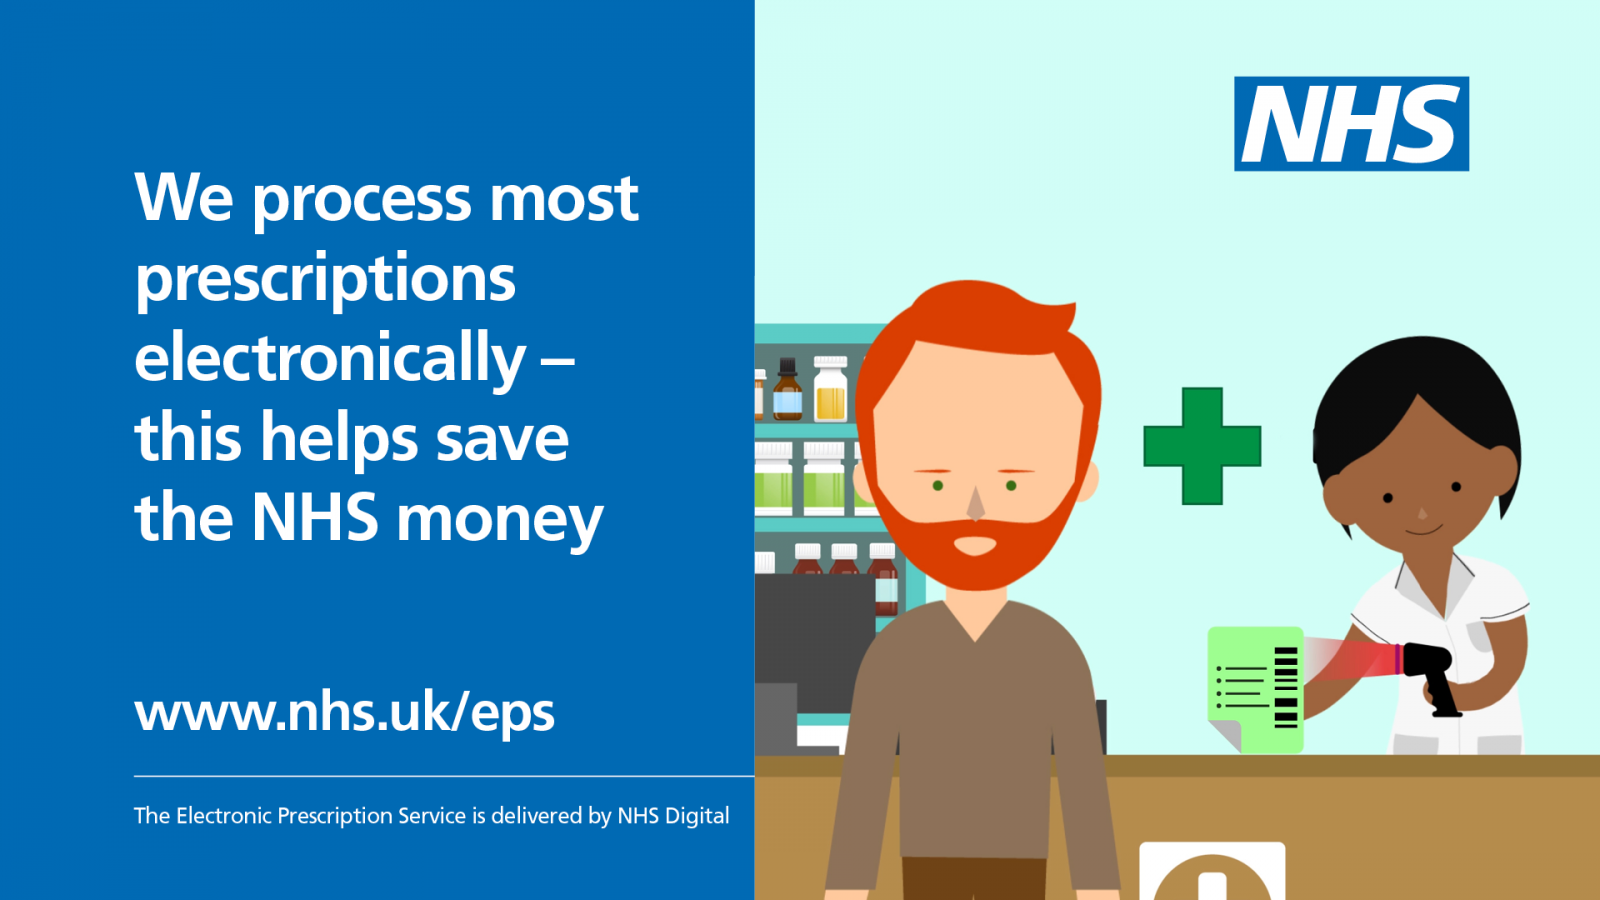 We process most prescriptions electronically - this helps the NHS save money